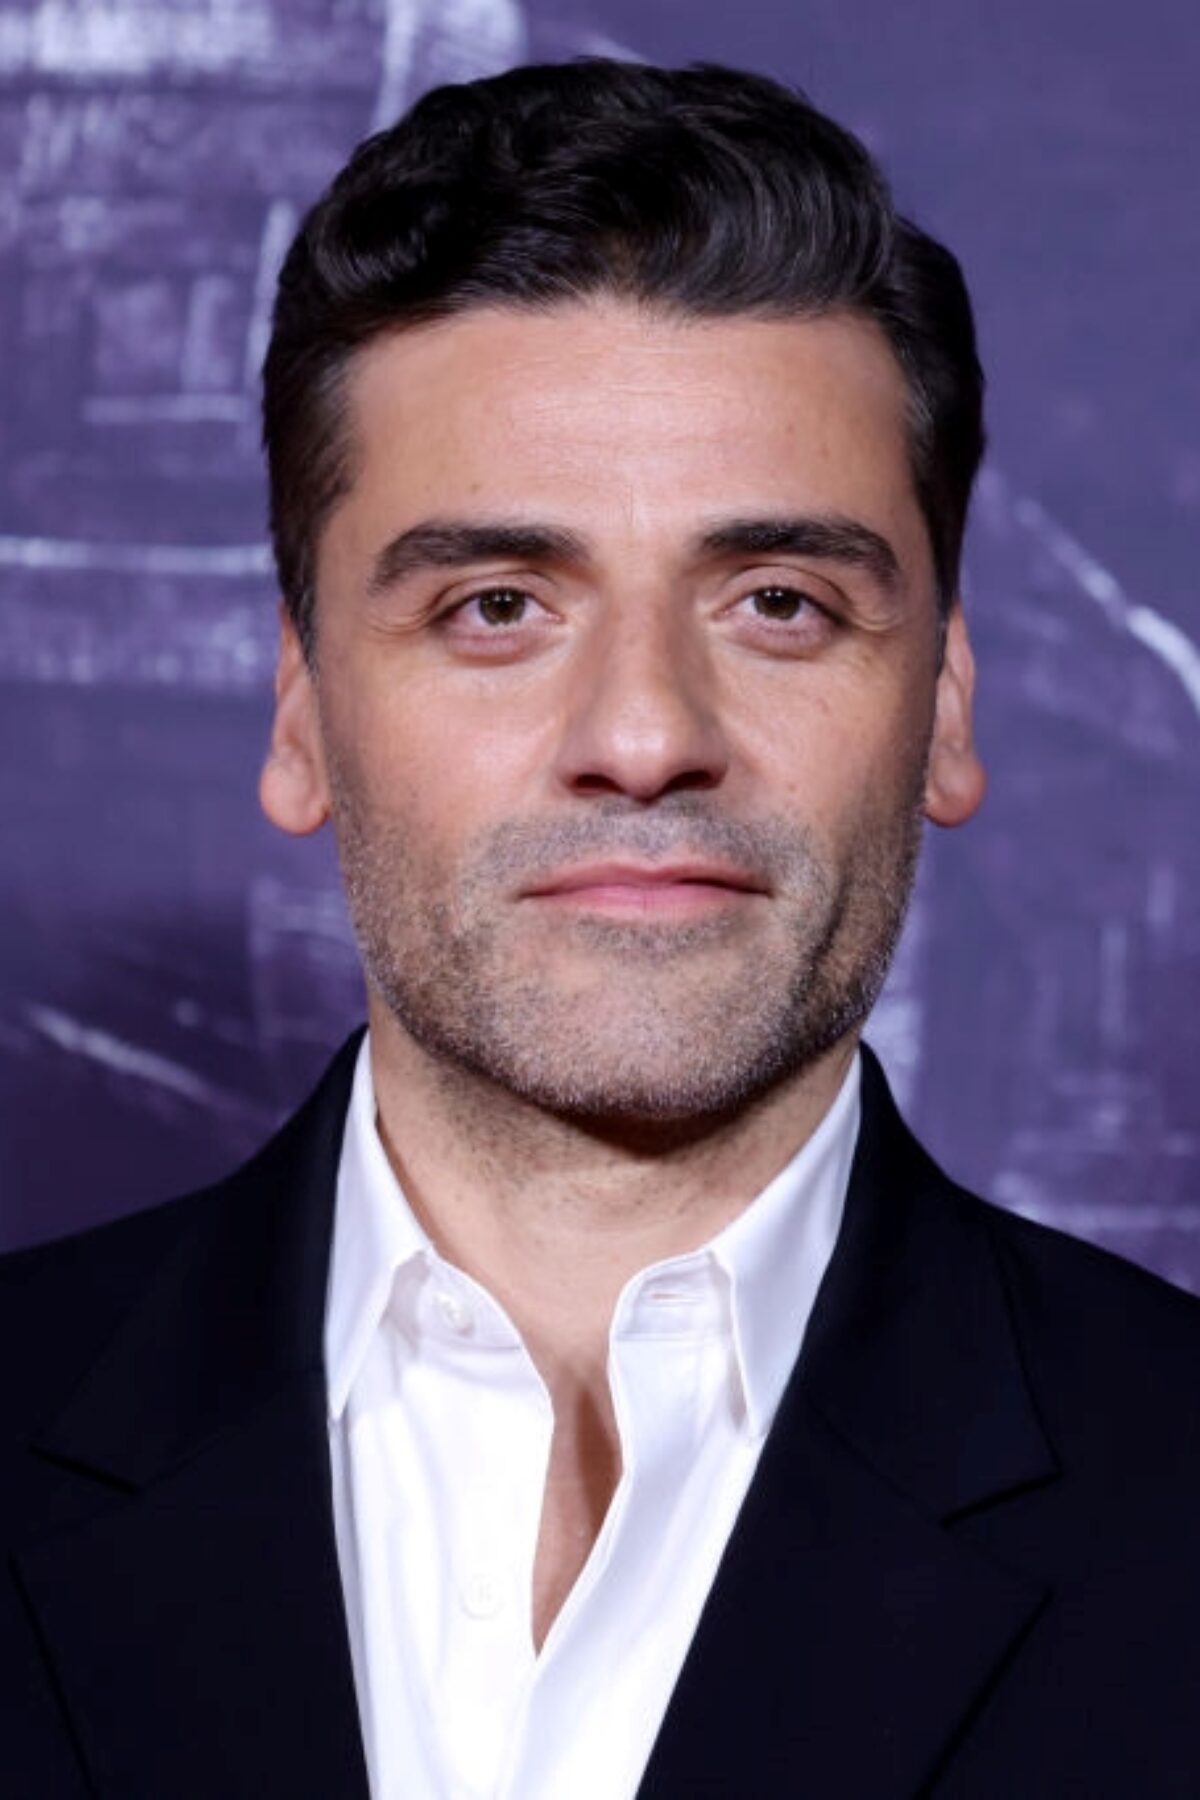 BERLIN, GERMANY - MARCH 14: Oscar Isaac attends a special screening of 